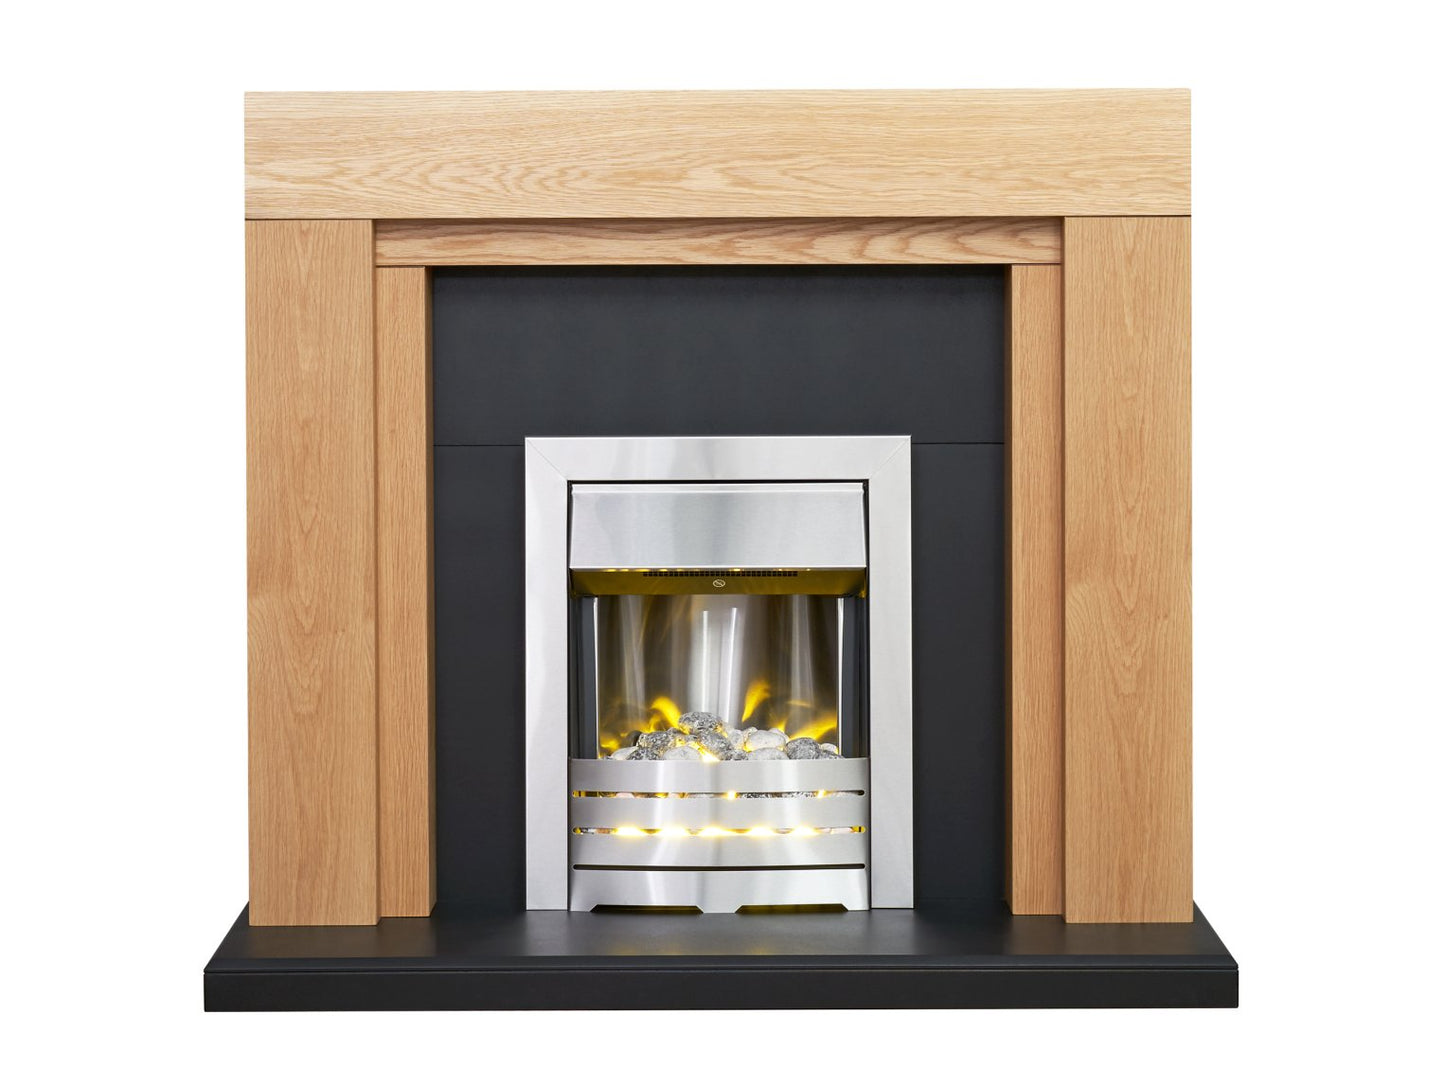 Adam Beaumont Oak & Black Fireplace with Downlights & Helios Electric Fire in Brushed Steel, 48 Inch